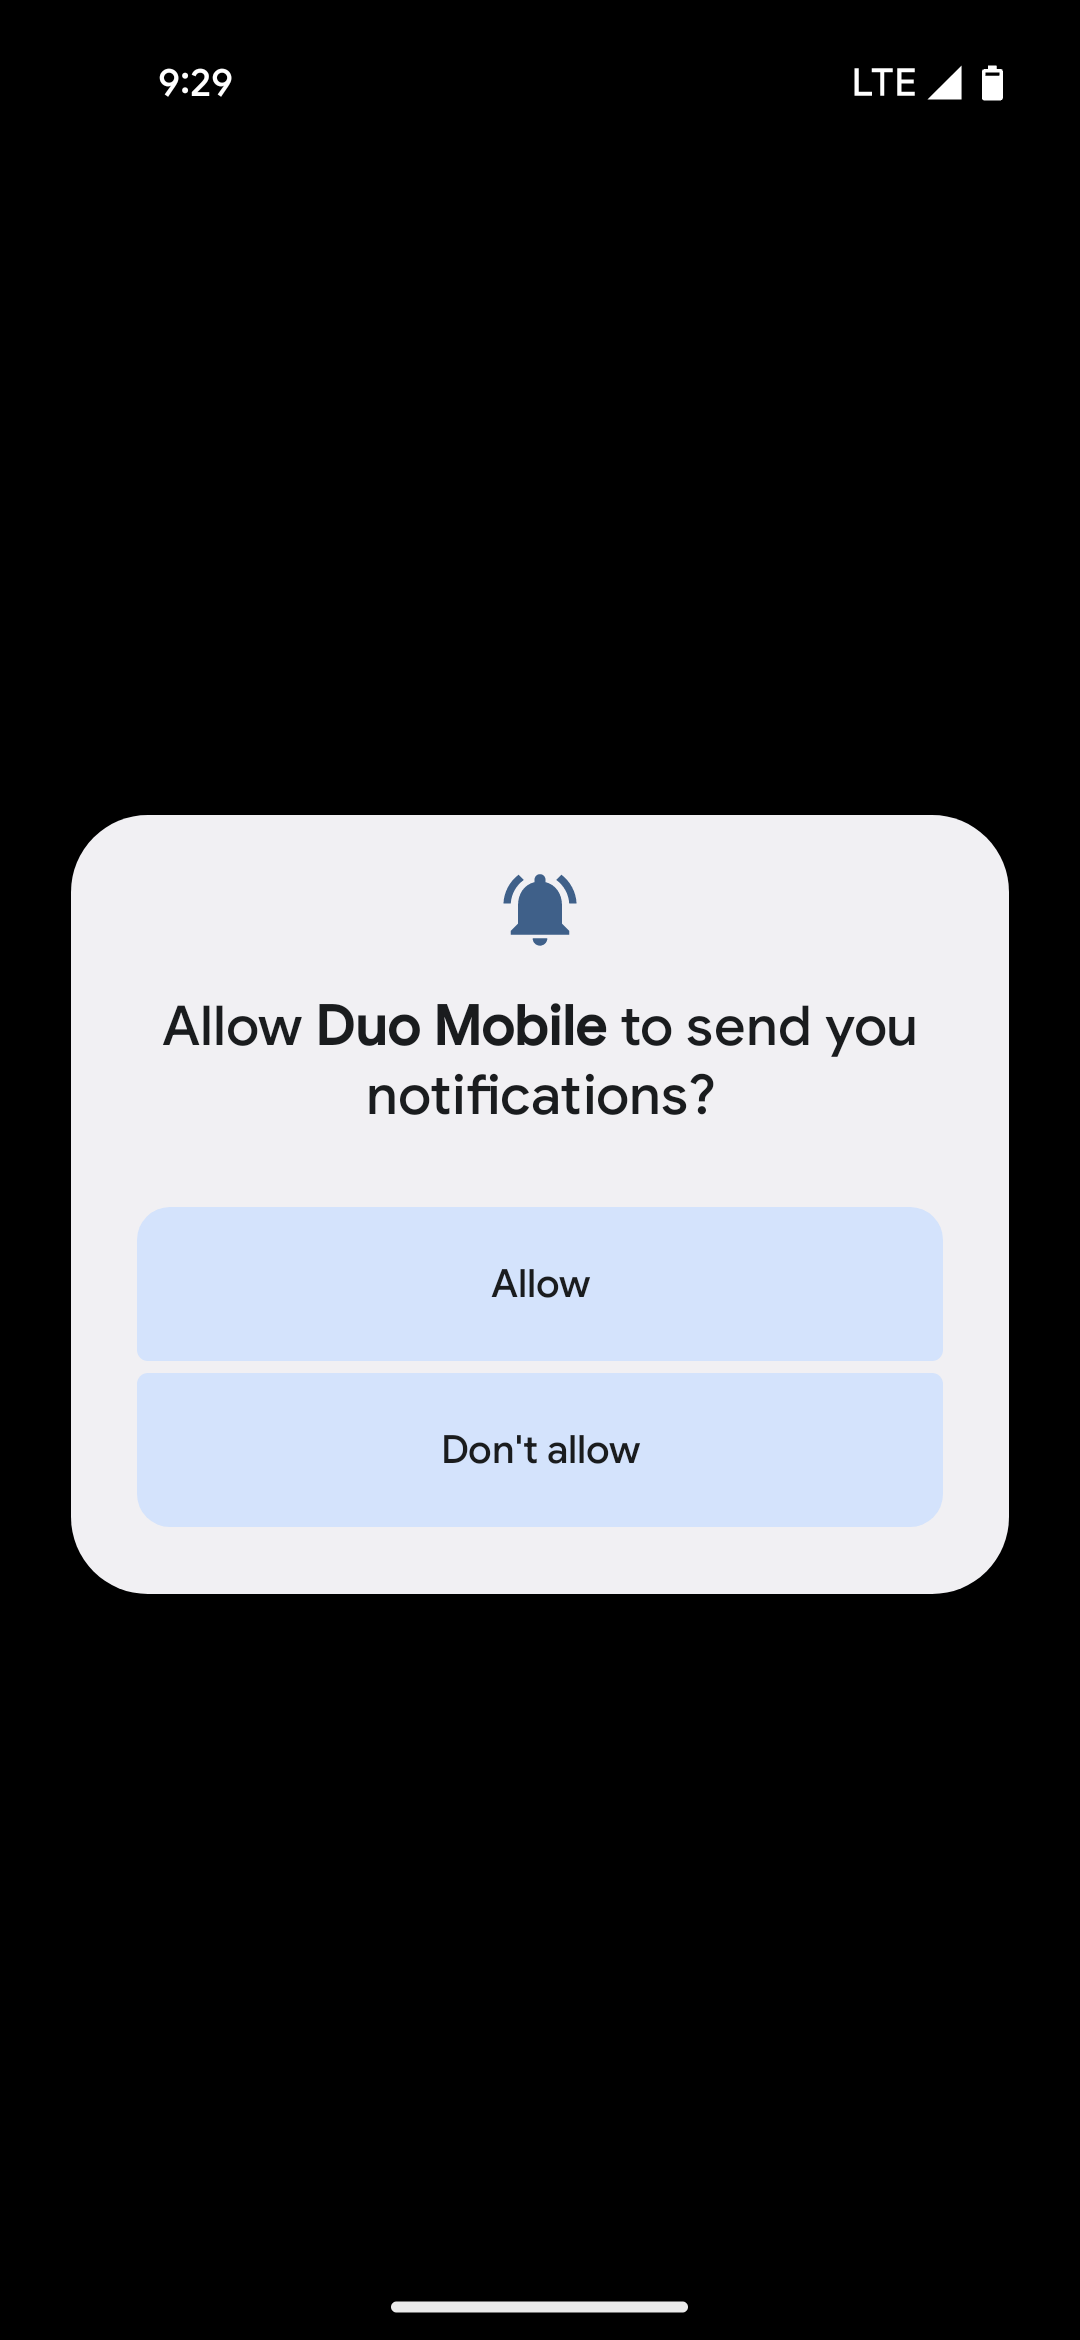 Allow Duo Mobile to send notifications image